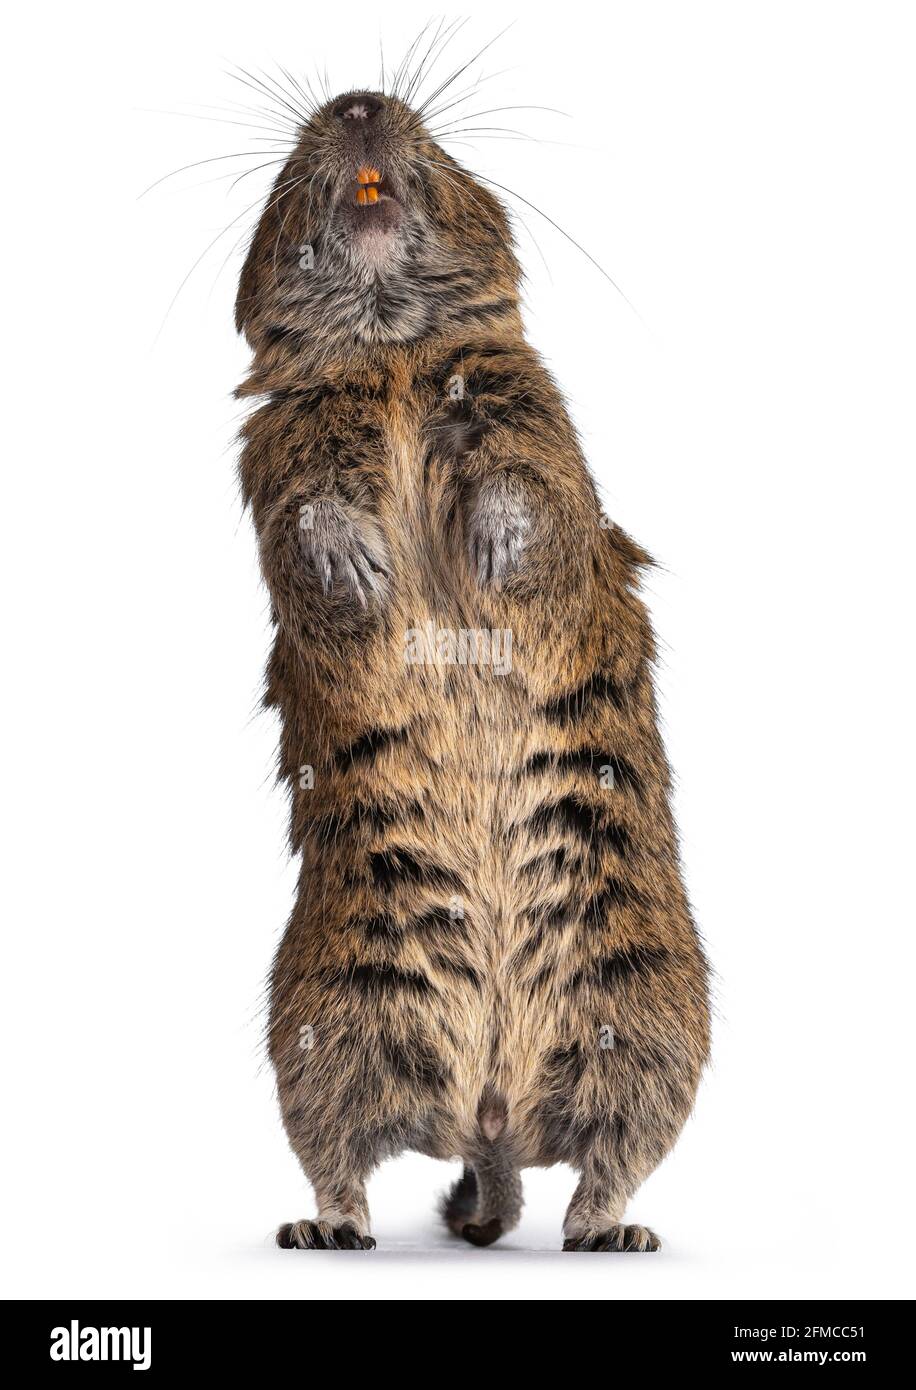 Young Degu rodent aka Octodon degus, standing fully stretched on hind paws showing belly and teeth.  Isolated on a white background. Stock Photo